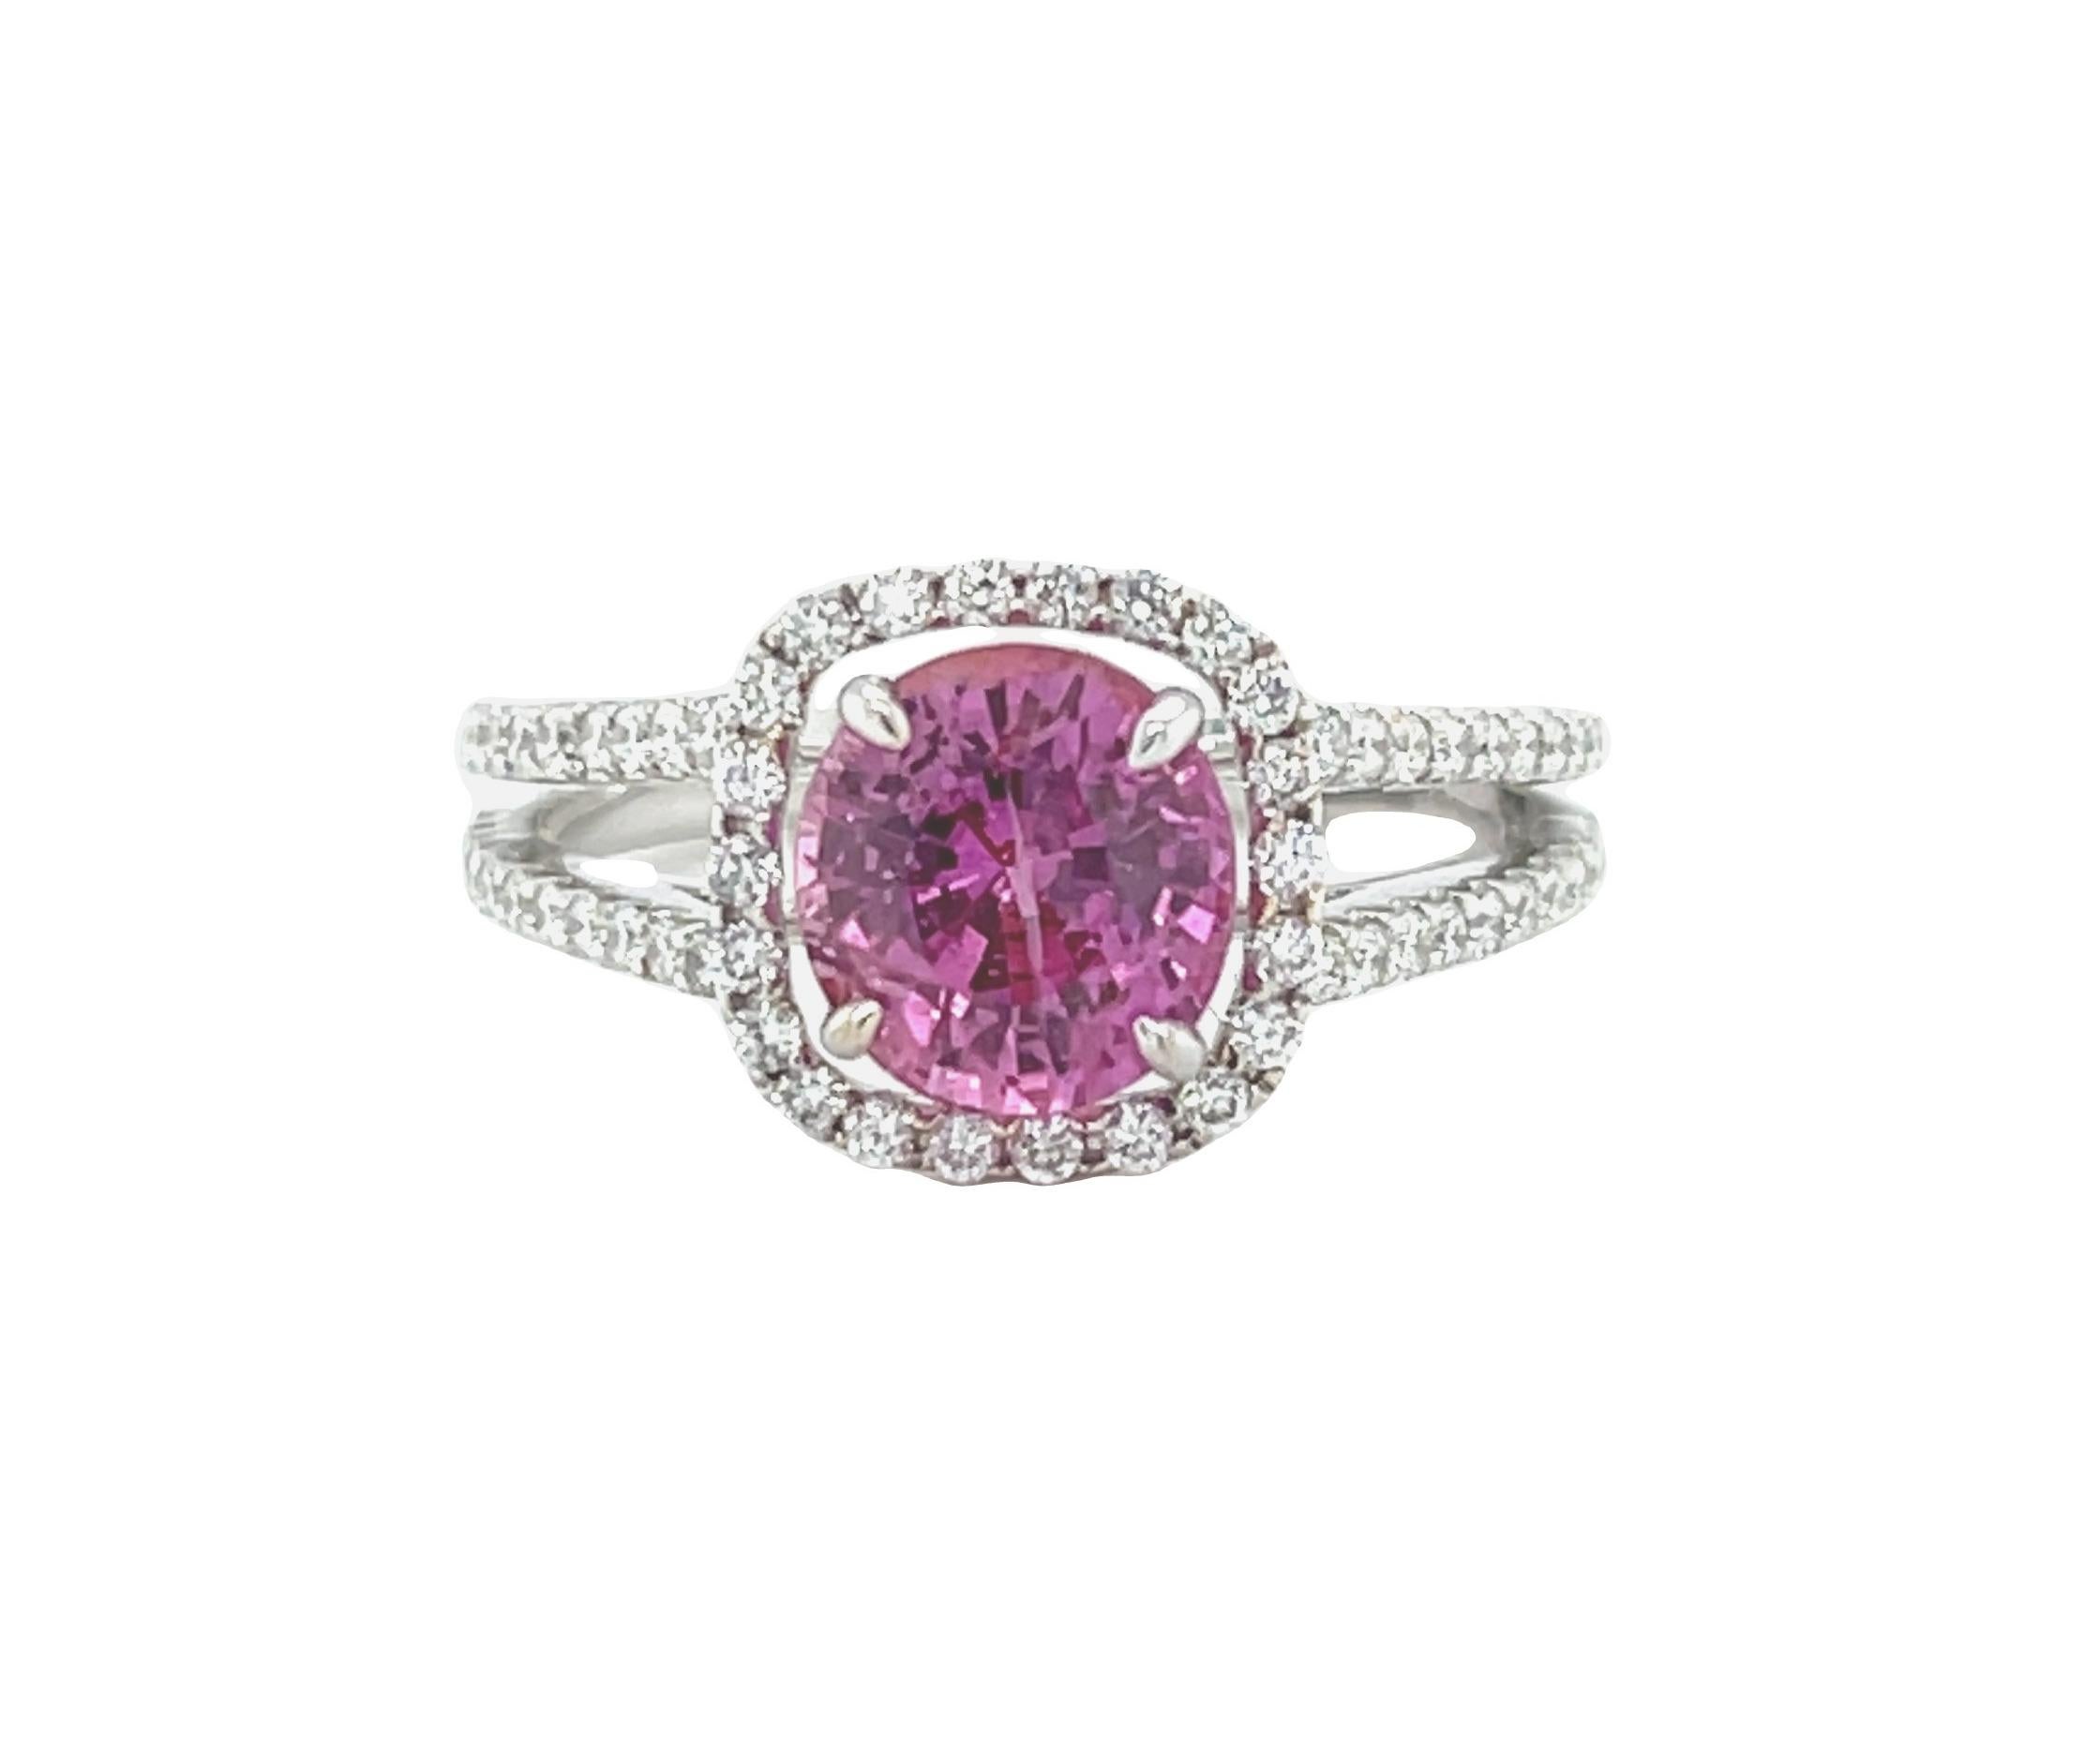 This beautiful 18k white gold ring features an absolutely stunning, 2.42 carat round pink sapphire GEM! Weighing 2.42 carats, the pink sapphire has vivid pure pink color and extraordinary brilliance, making this stone appear full of life from all